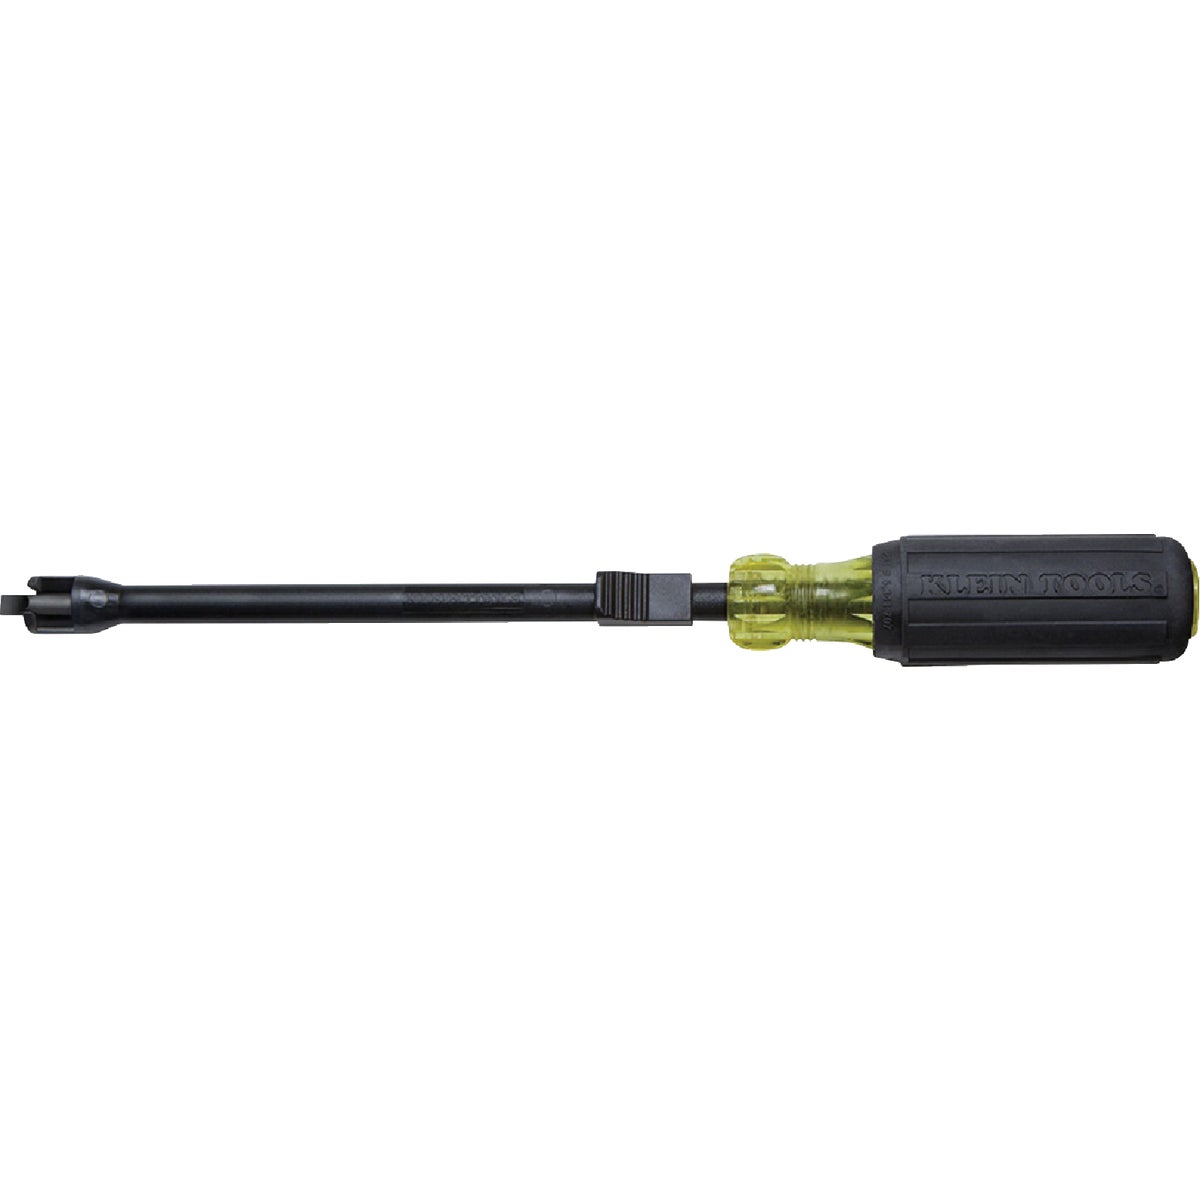 Item 364698, This Slotted Screw holding Screwdriver from Klein Tools is designed to hold